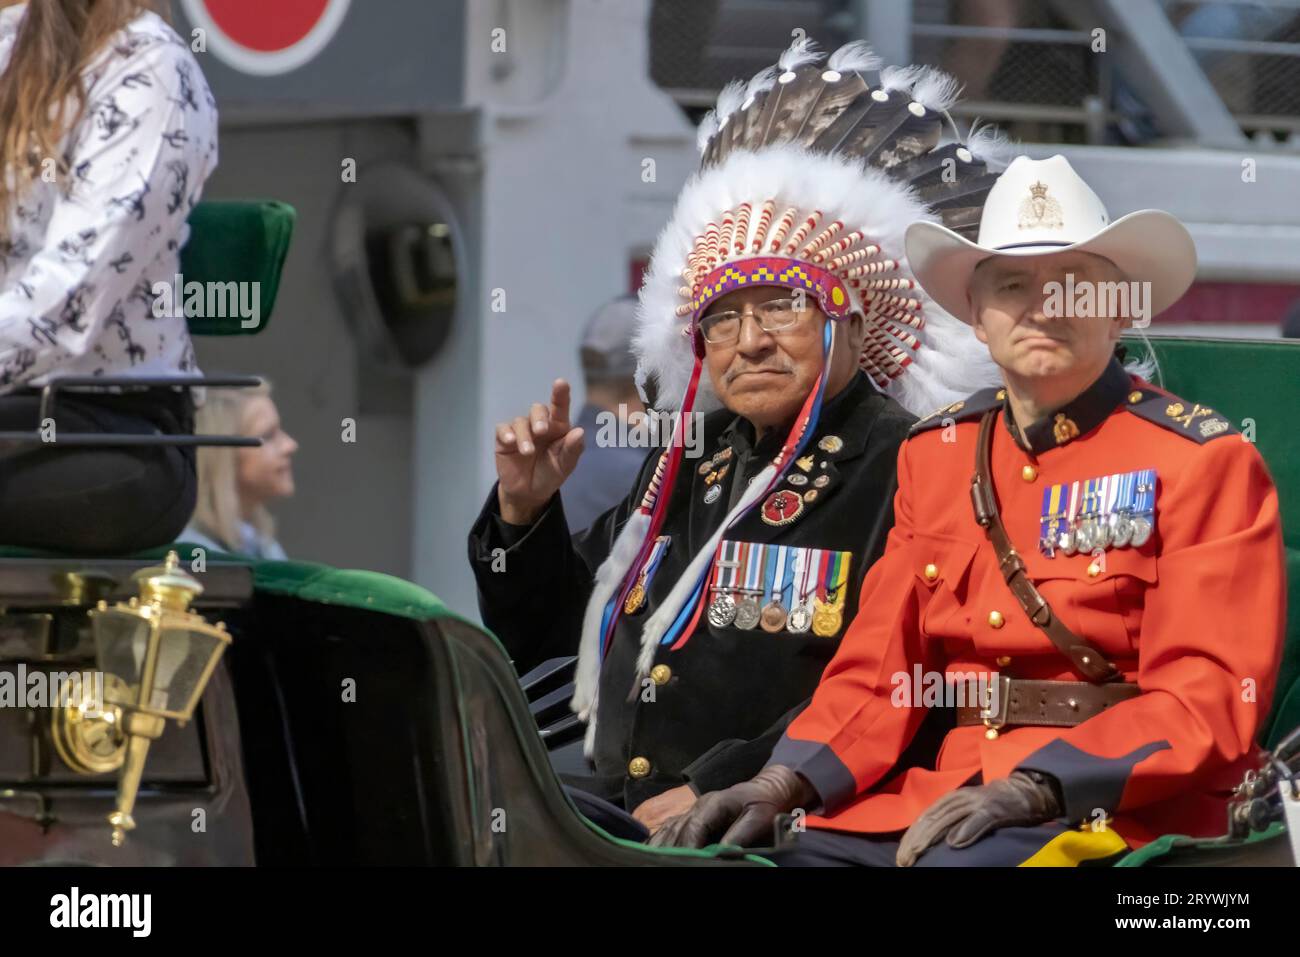 Calgary, Alberta, Canada. July 7, 2023. A First Nation and a Royal Canadian Mounted Police member at a public parade. Stock Photo